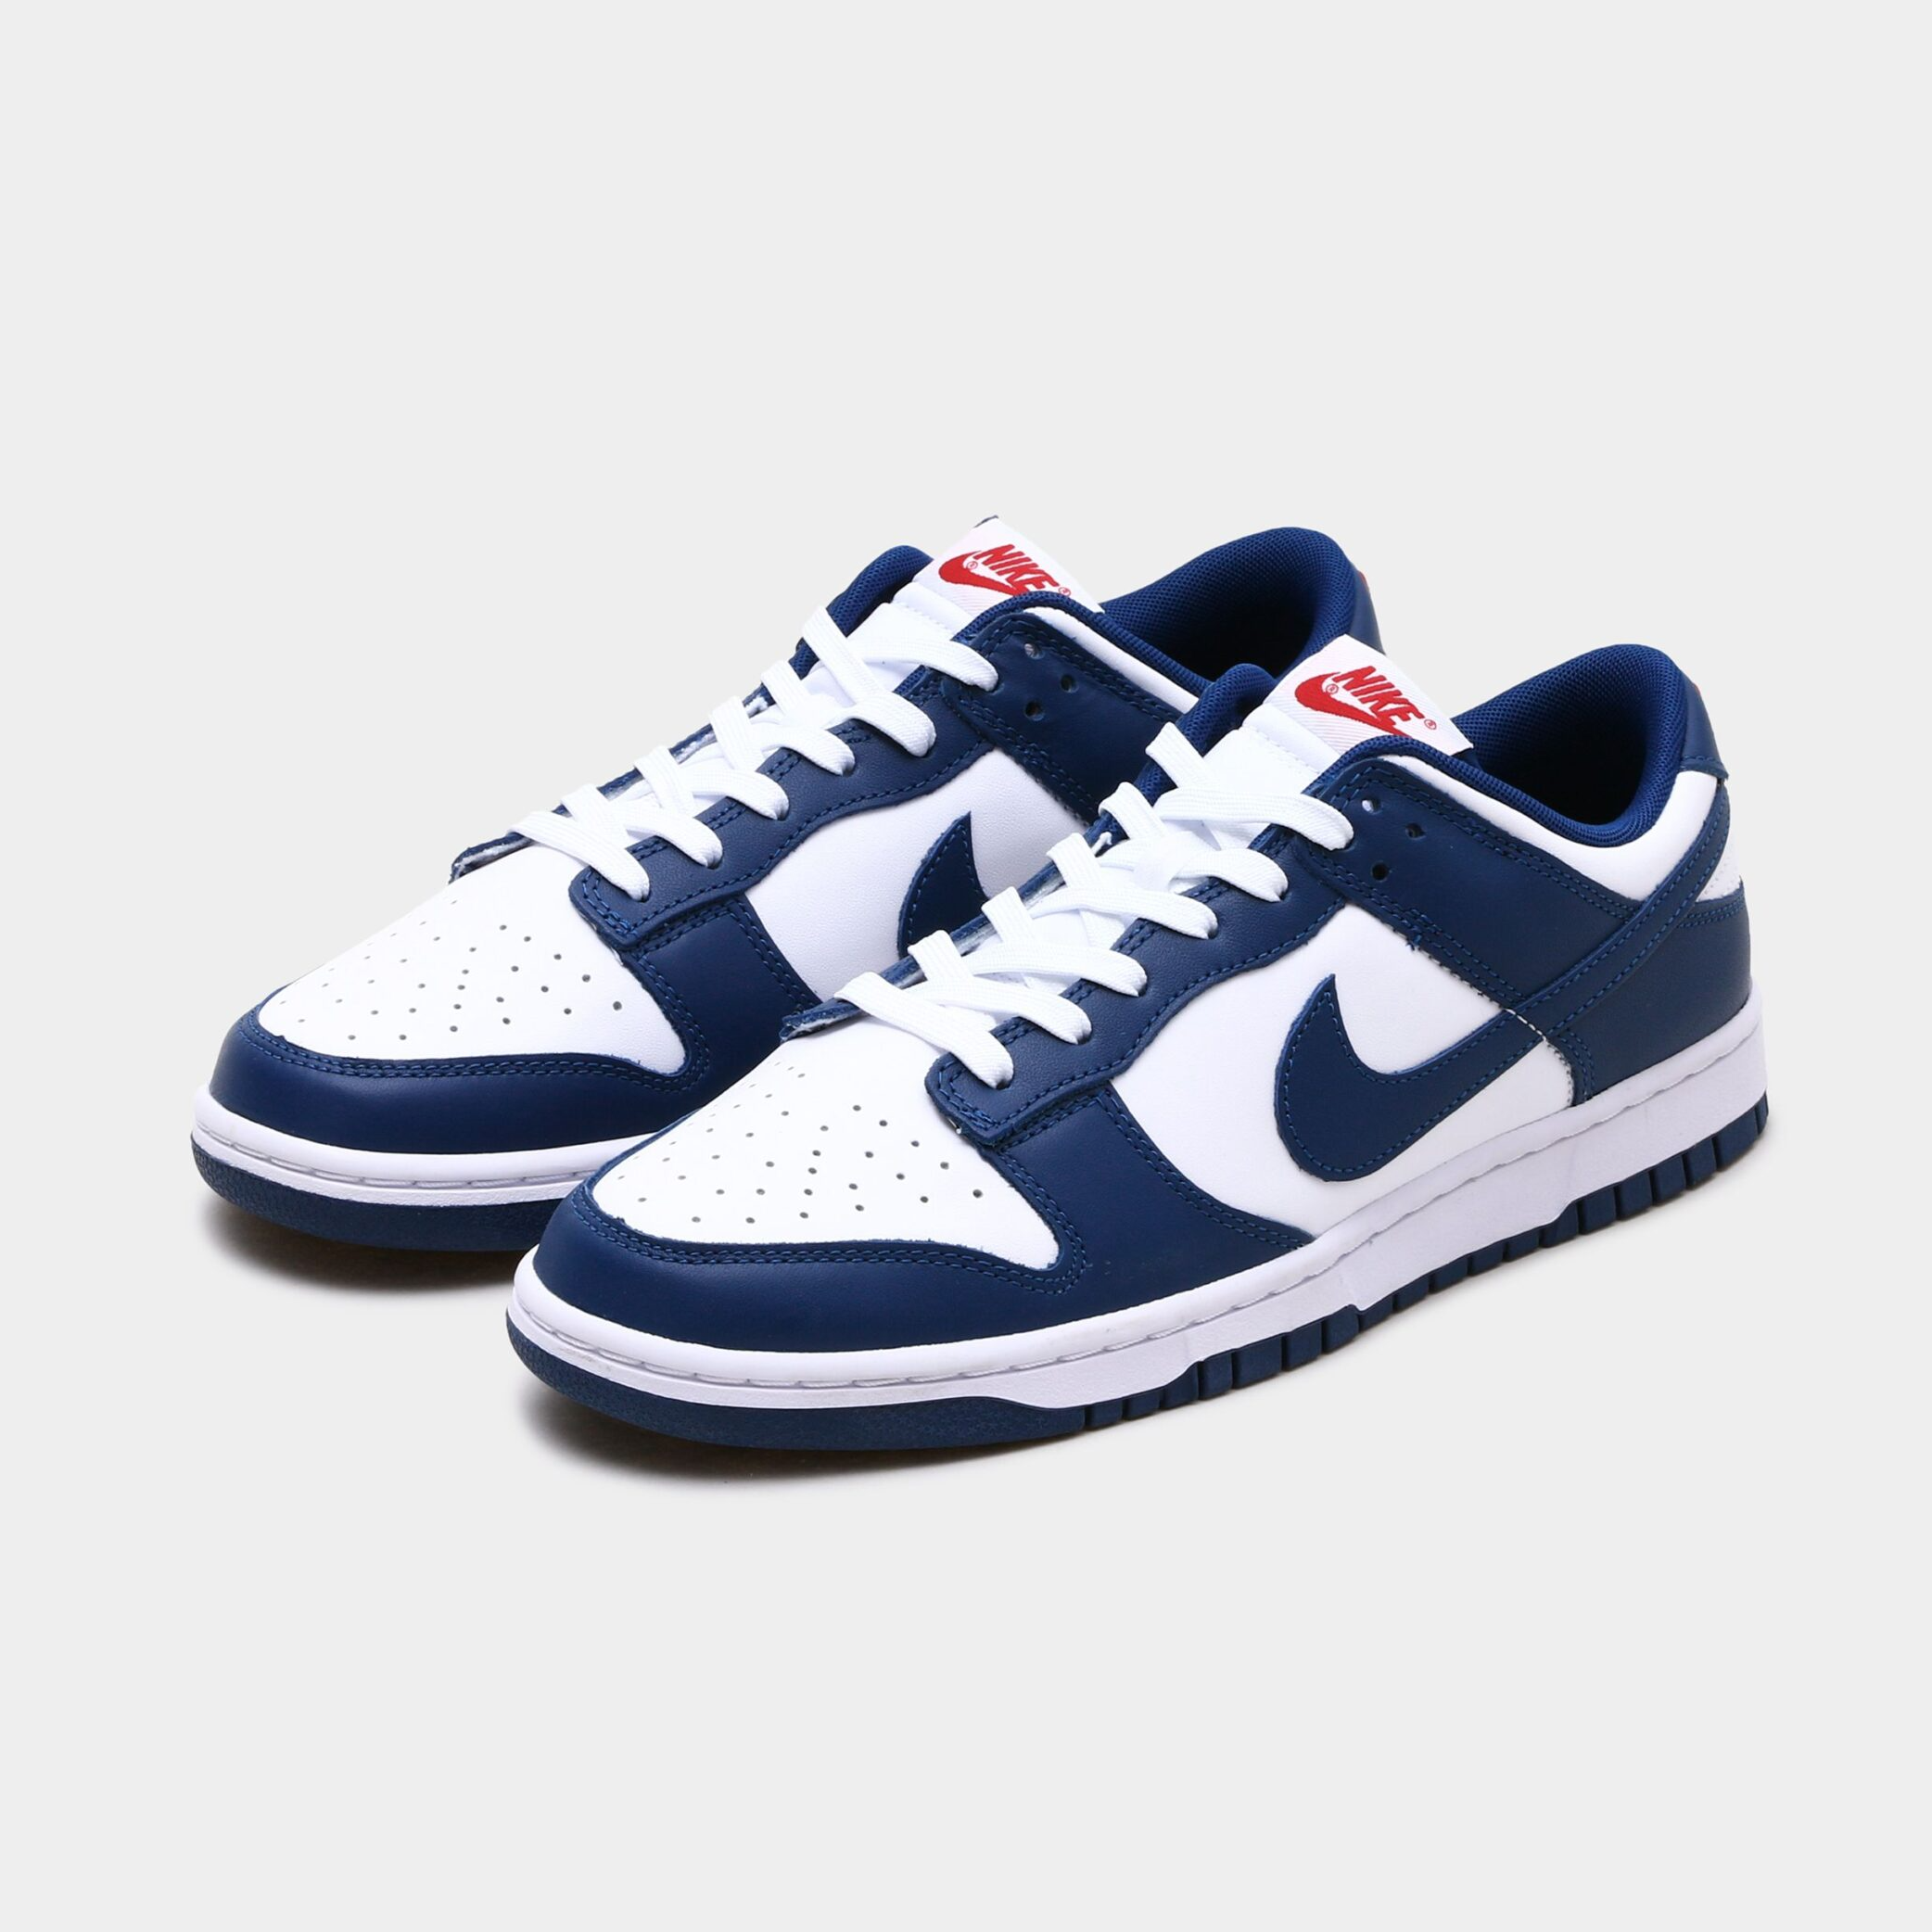 Now Available: Nike Dunk Low Retro "Valerian Blue" — Sneaker Shouts